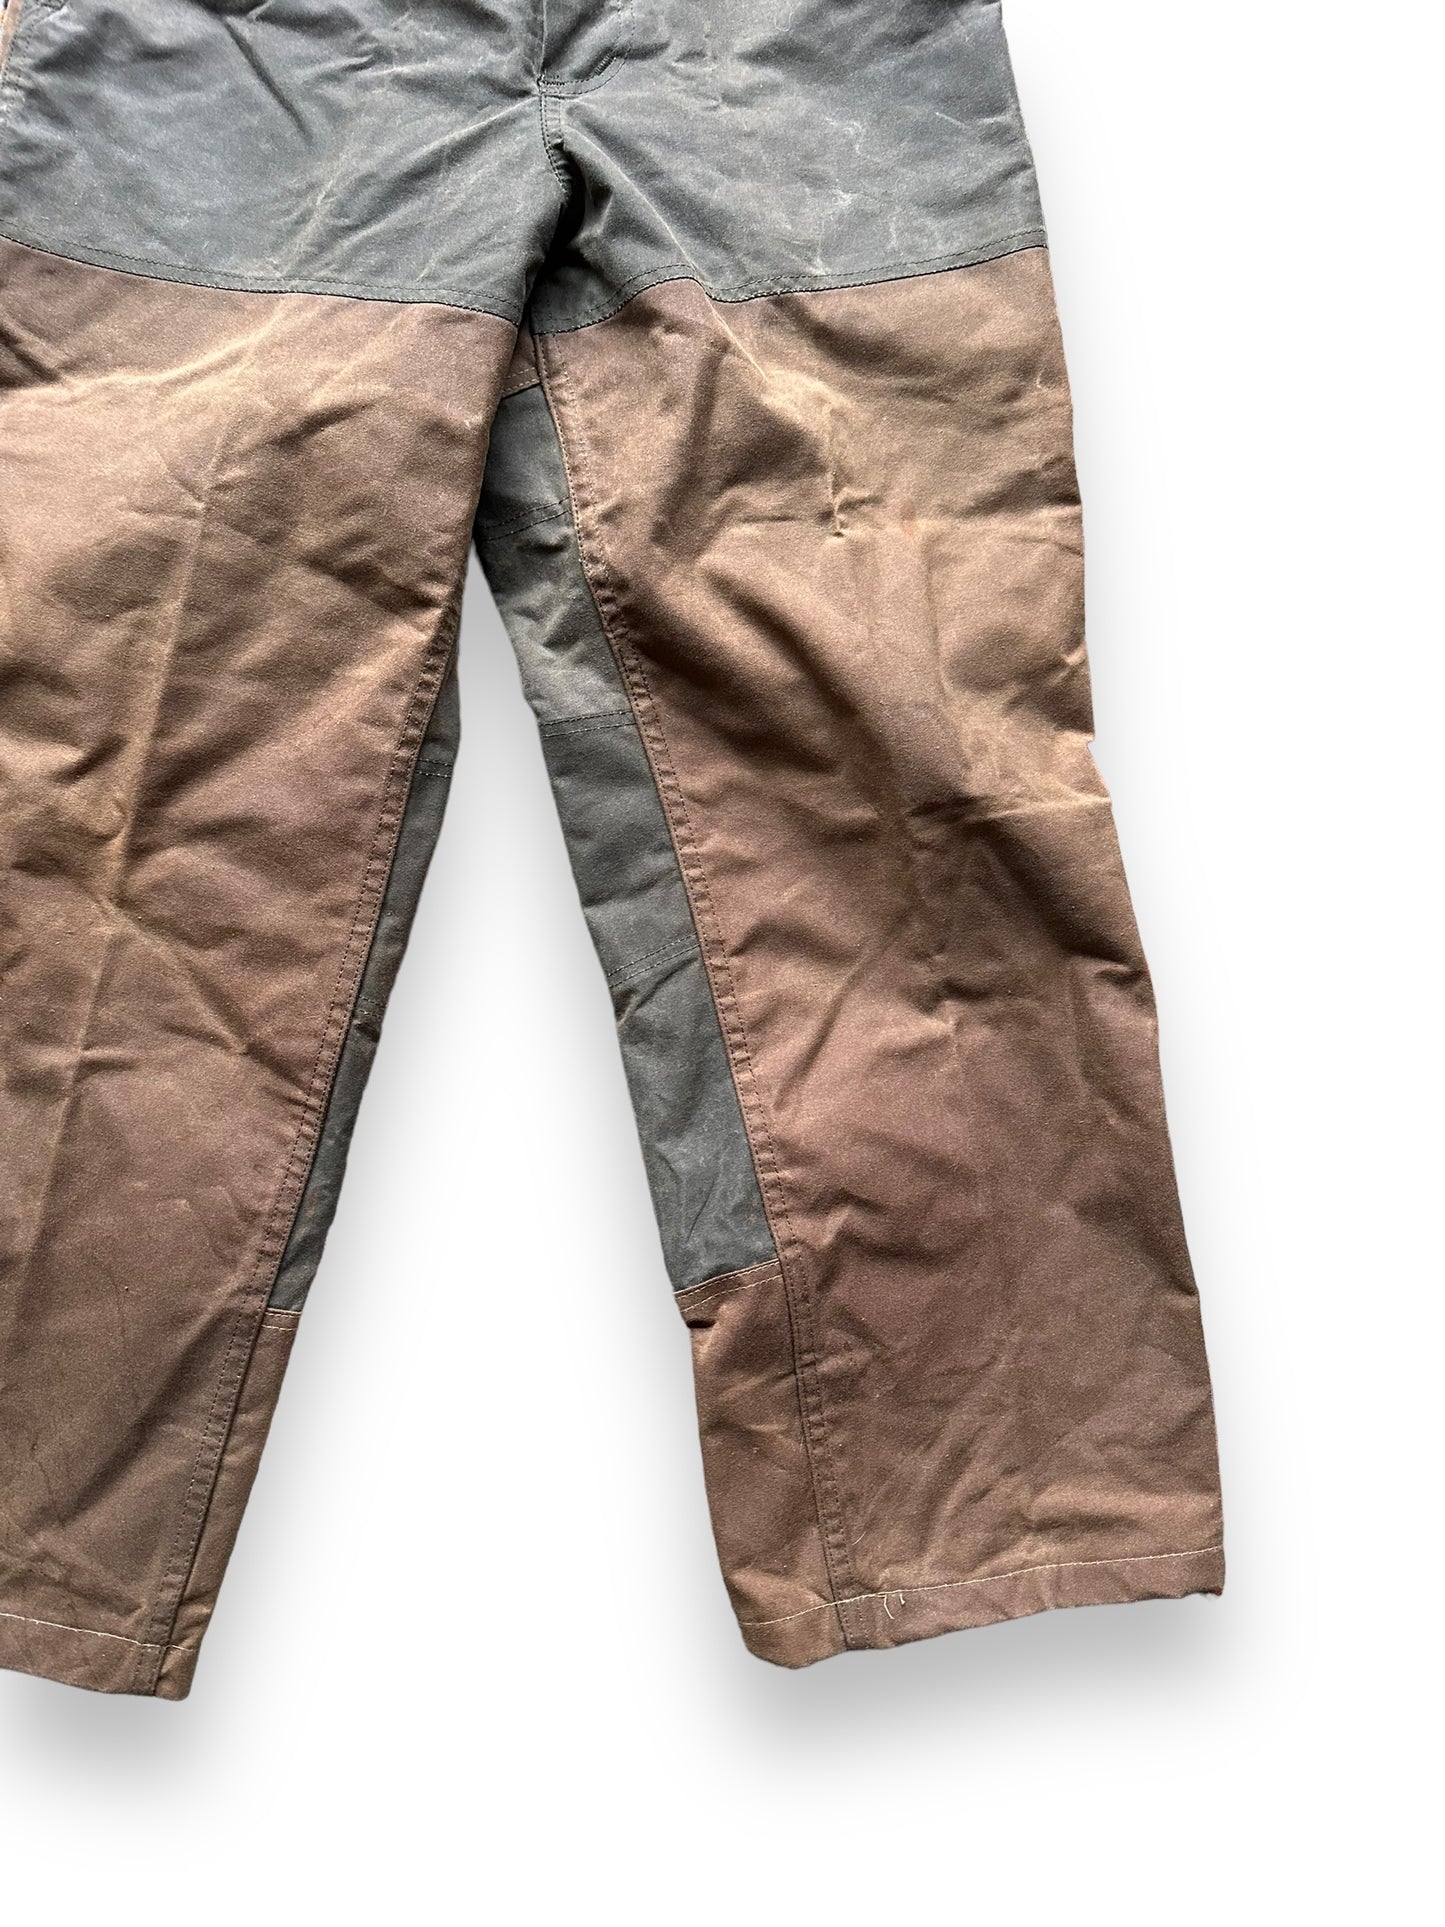 Front Left Pant Left View of Vintage Filson Tin Cloth Double Hunting Pants W34 |  Barn Owl Vintage Goods | Filson Bargain Outlet Seattle